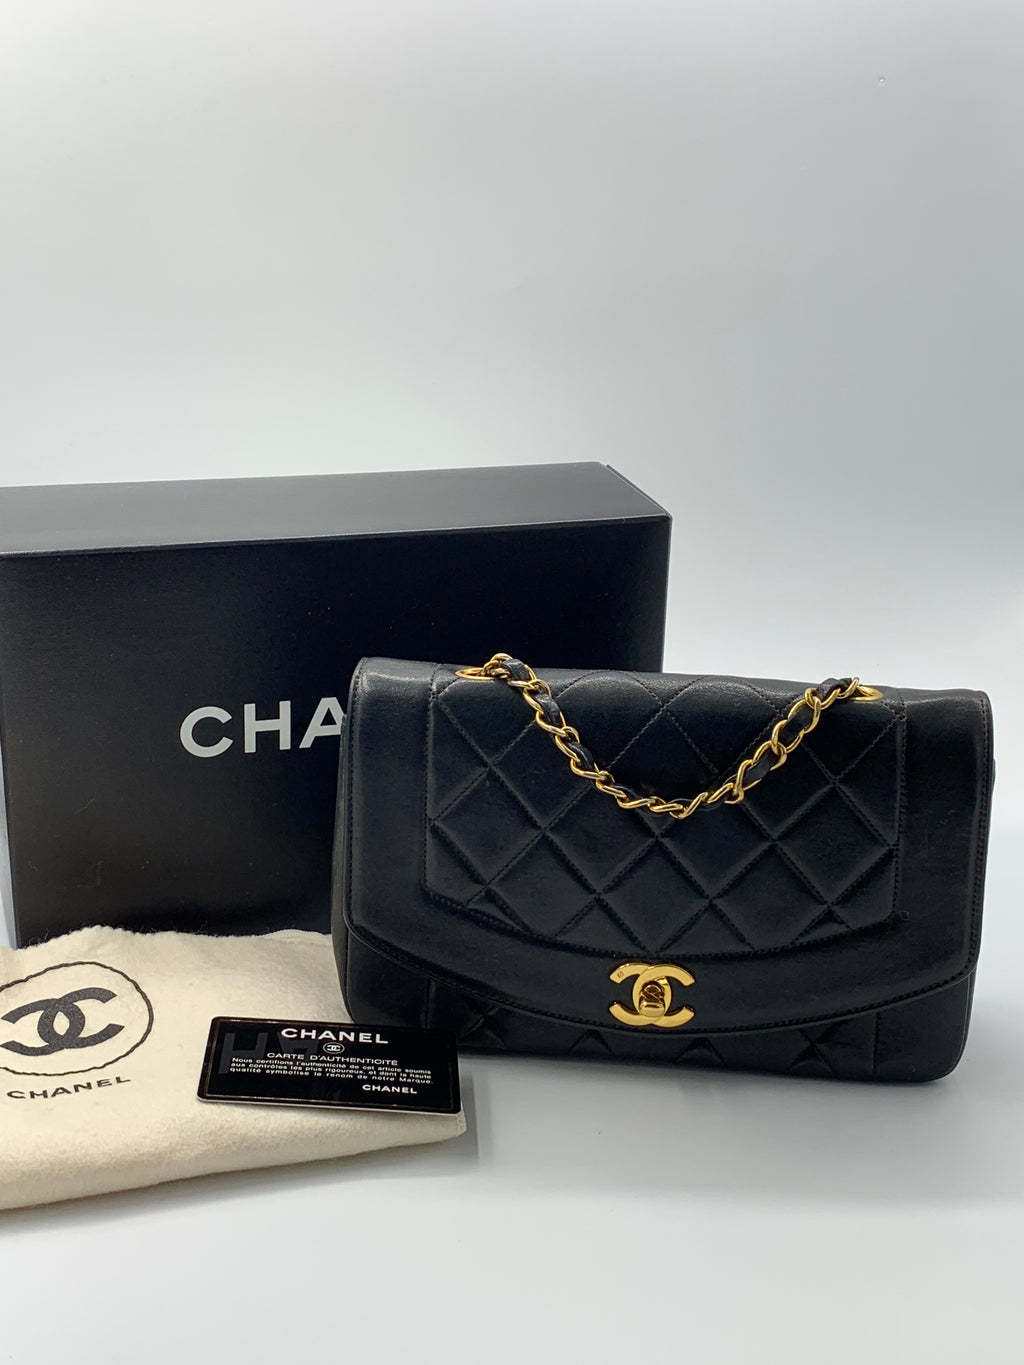 Chanel Diana Mini - 3 For Sale on 1stDibs  chanel diana reissue, chanel  diana small, chanel mini diana bag